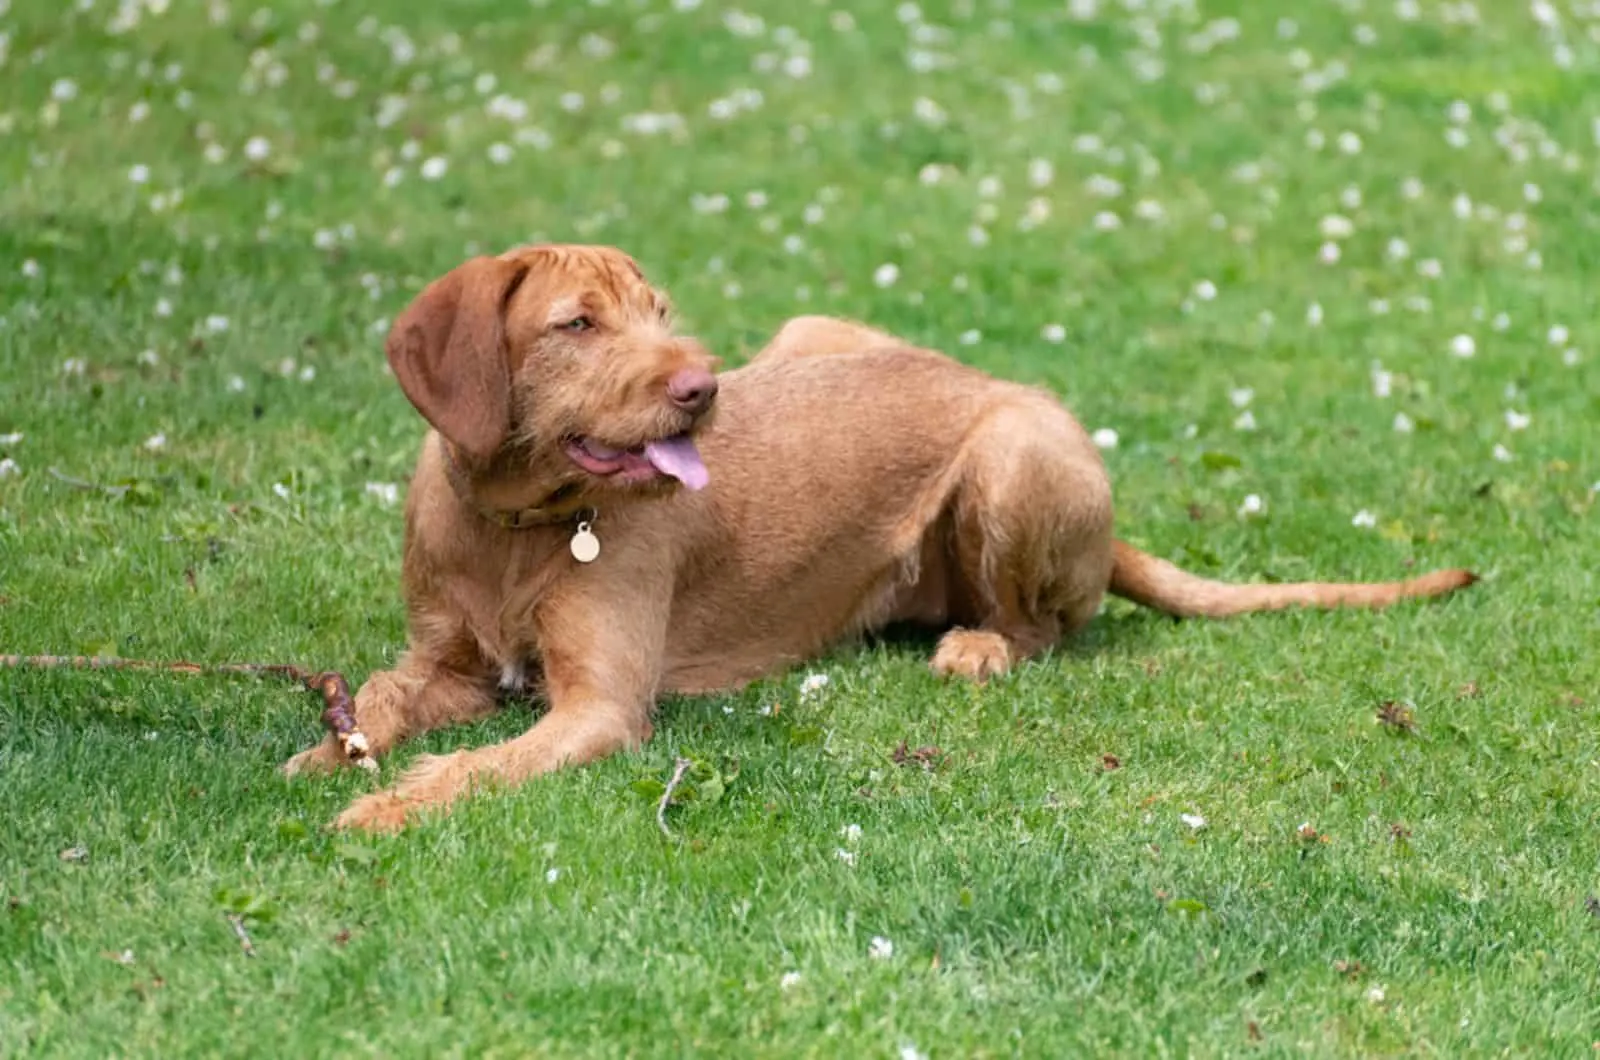 wirehaired vizsla puppy lying on the grass